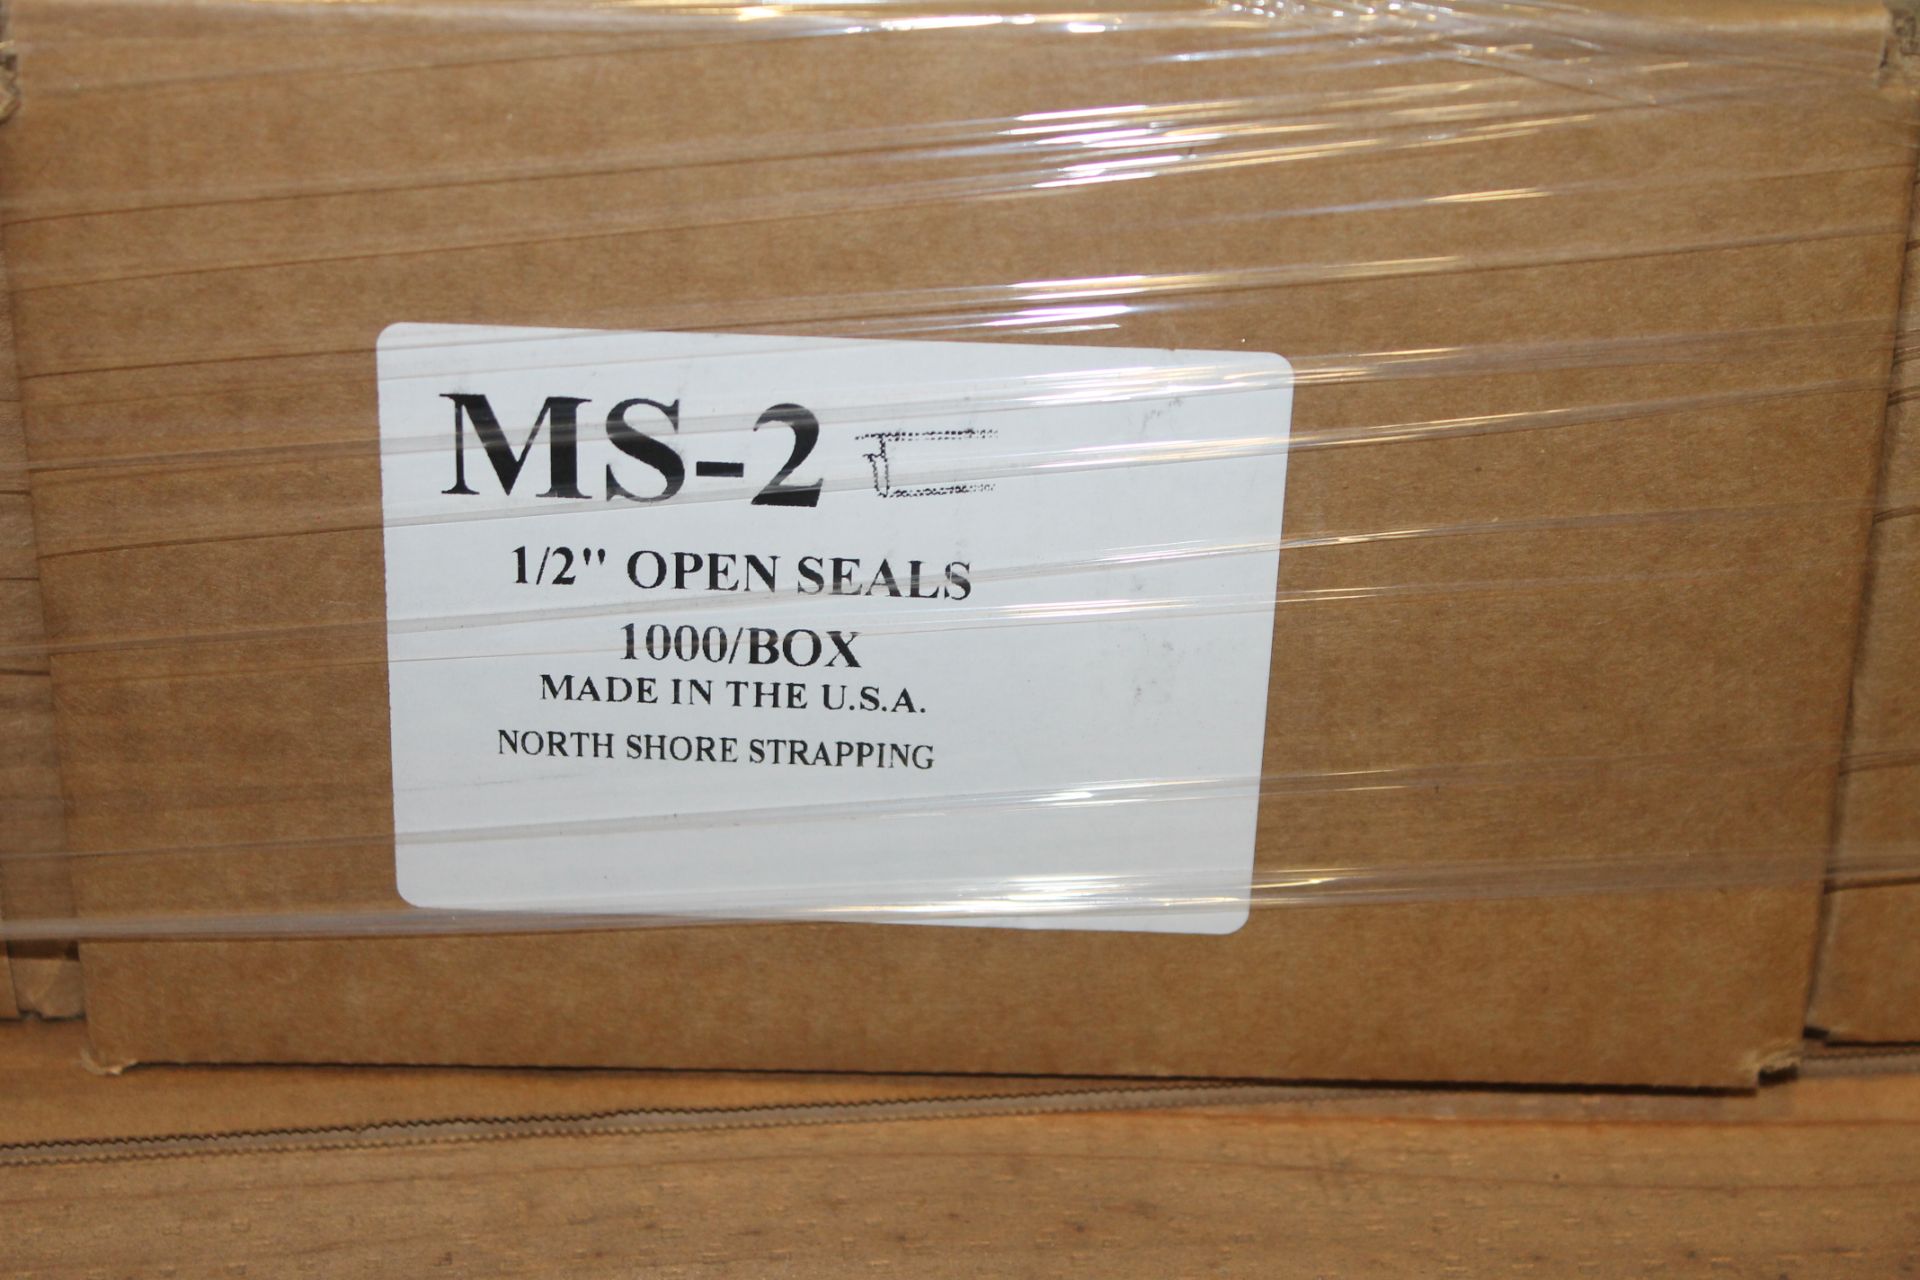 10 BOXES 1/2""""OPEN SEALS MS-2 - Image 2 of 2